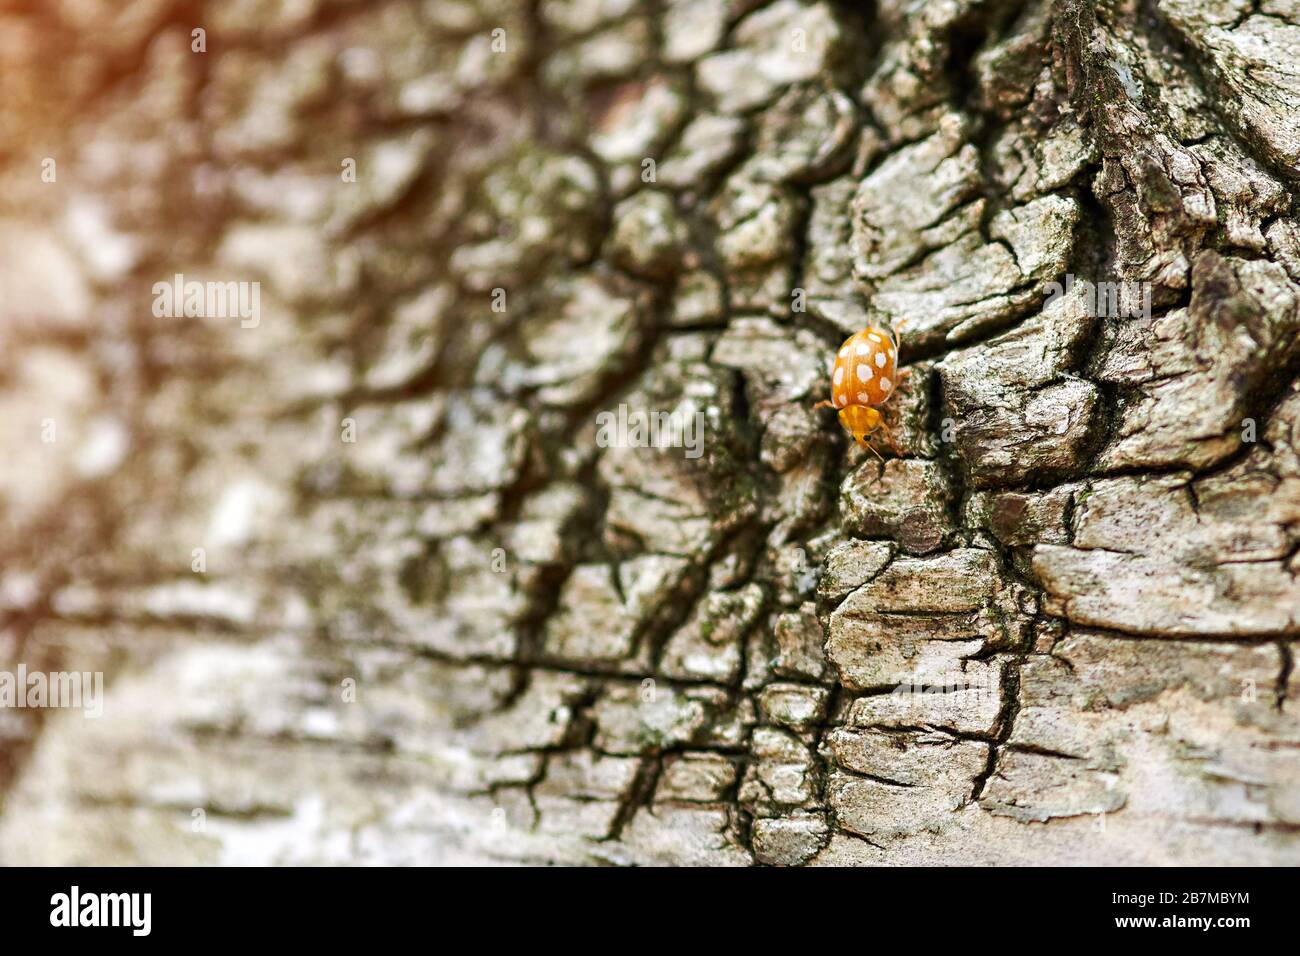 Yellow ladybug on birch tree. Little ladybird beetle, coccinellidae. Lady beetle creeping on a tree trunk in birch forest Stock Photo